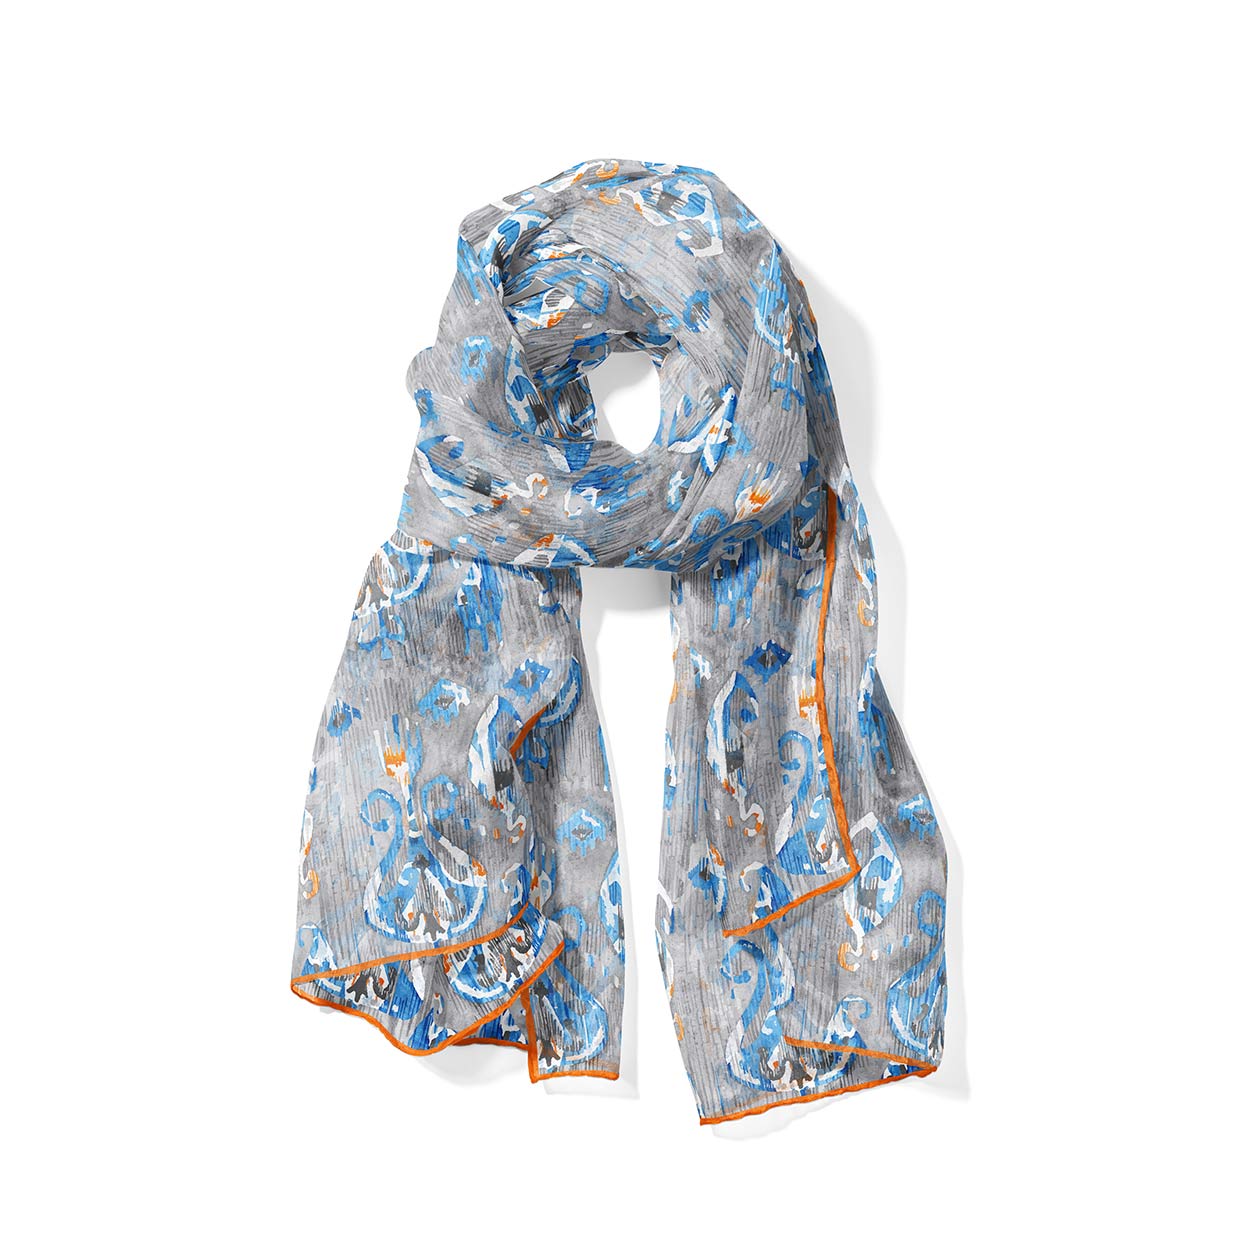 Grey Silk Scarf with a Print Inspired by Indonesian Artistic Motifs